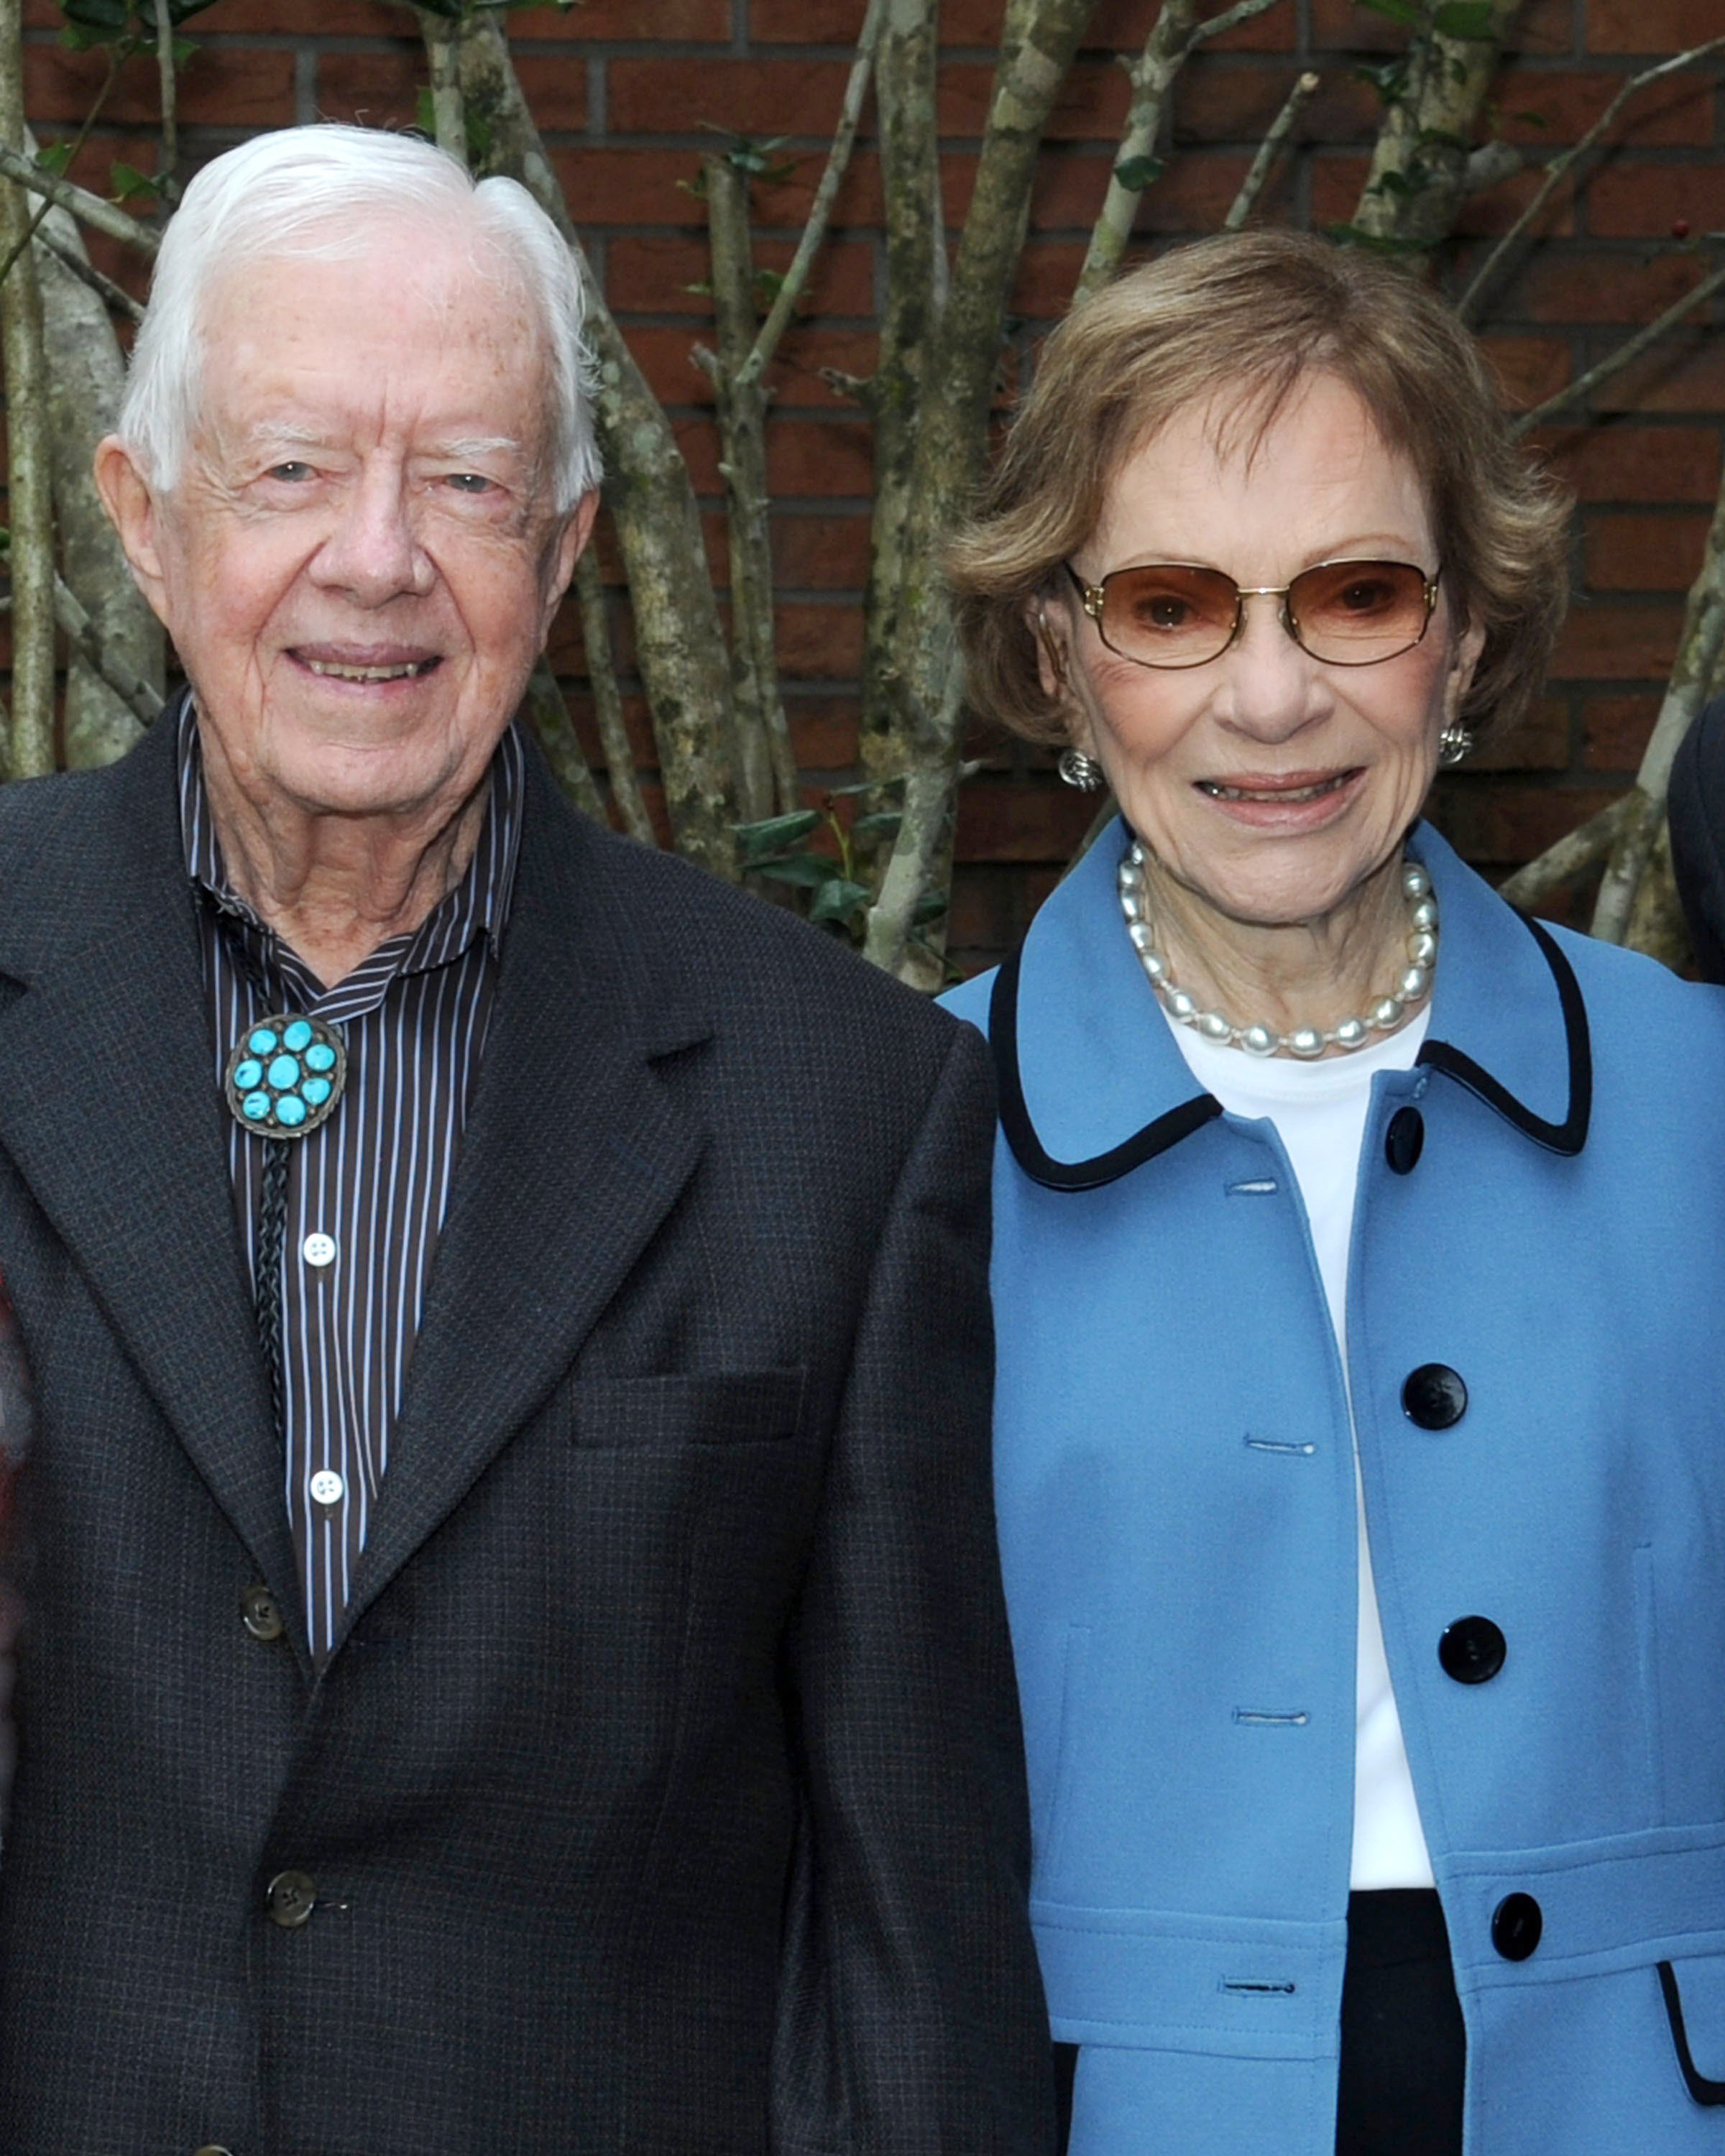 Former President Jimmy Carter and Rosalynn Carter attend church on Easter Sunday at Maranatha Baptist Church on April 20, 2014 in Plains, Georgia ┃Source: Getty Images